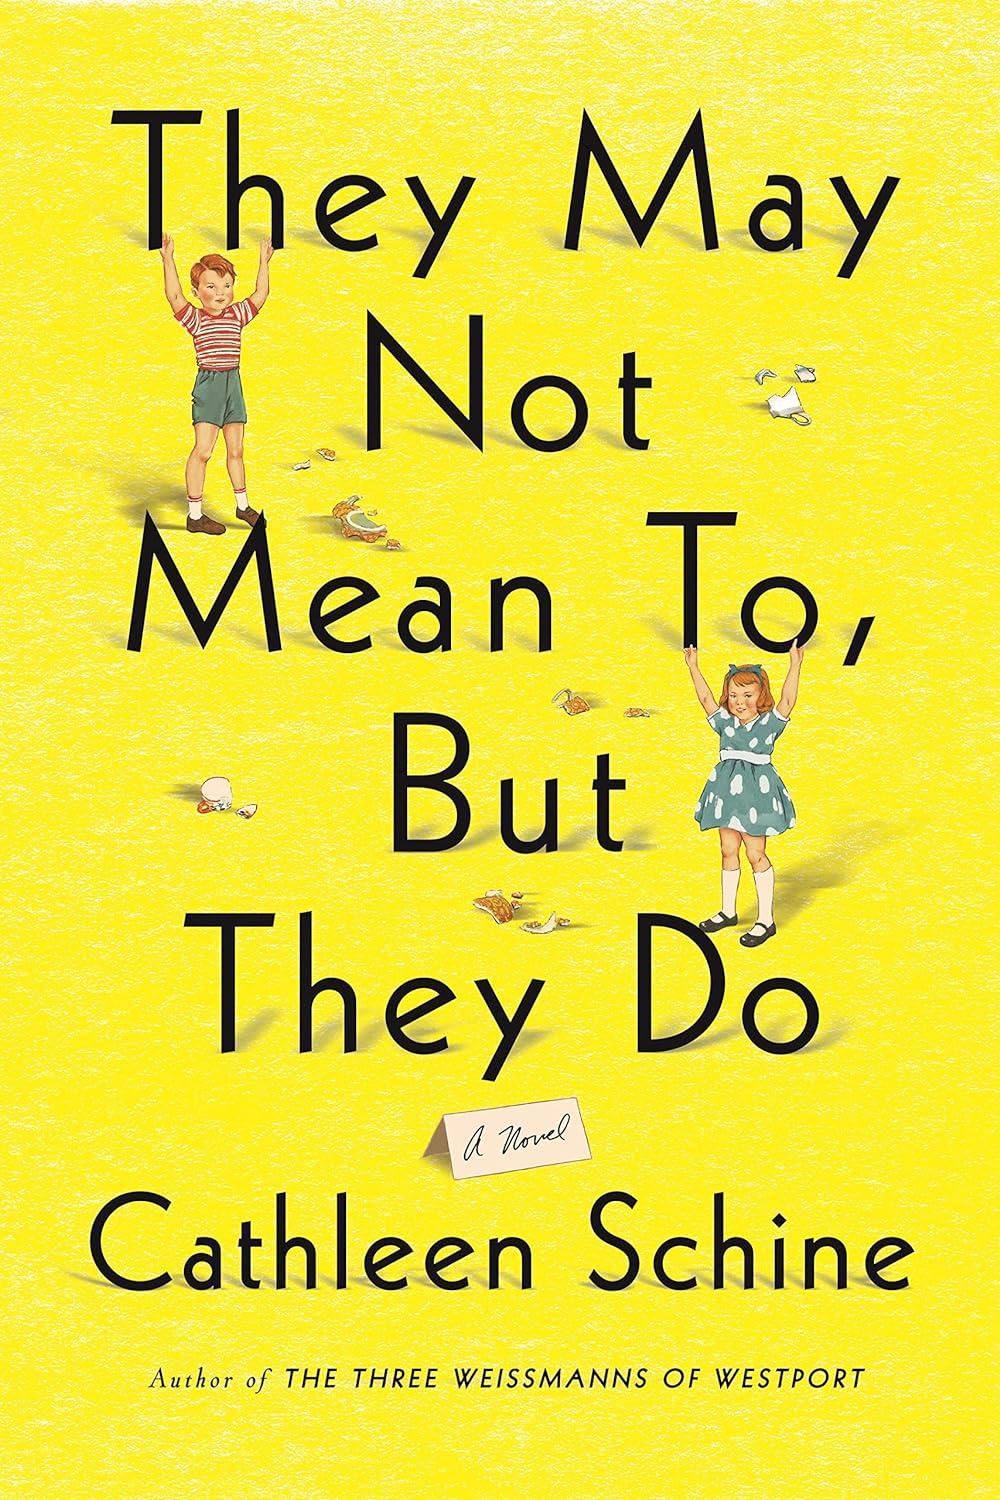 Cover of the Book "They May not Mean To, But They Do" by Cathleen Schine